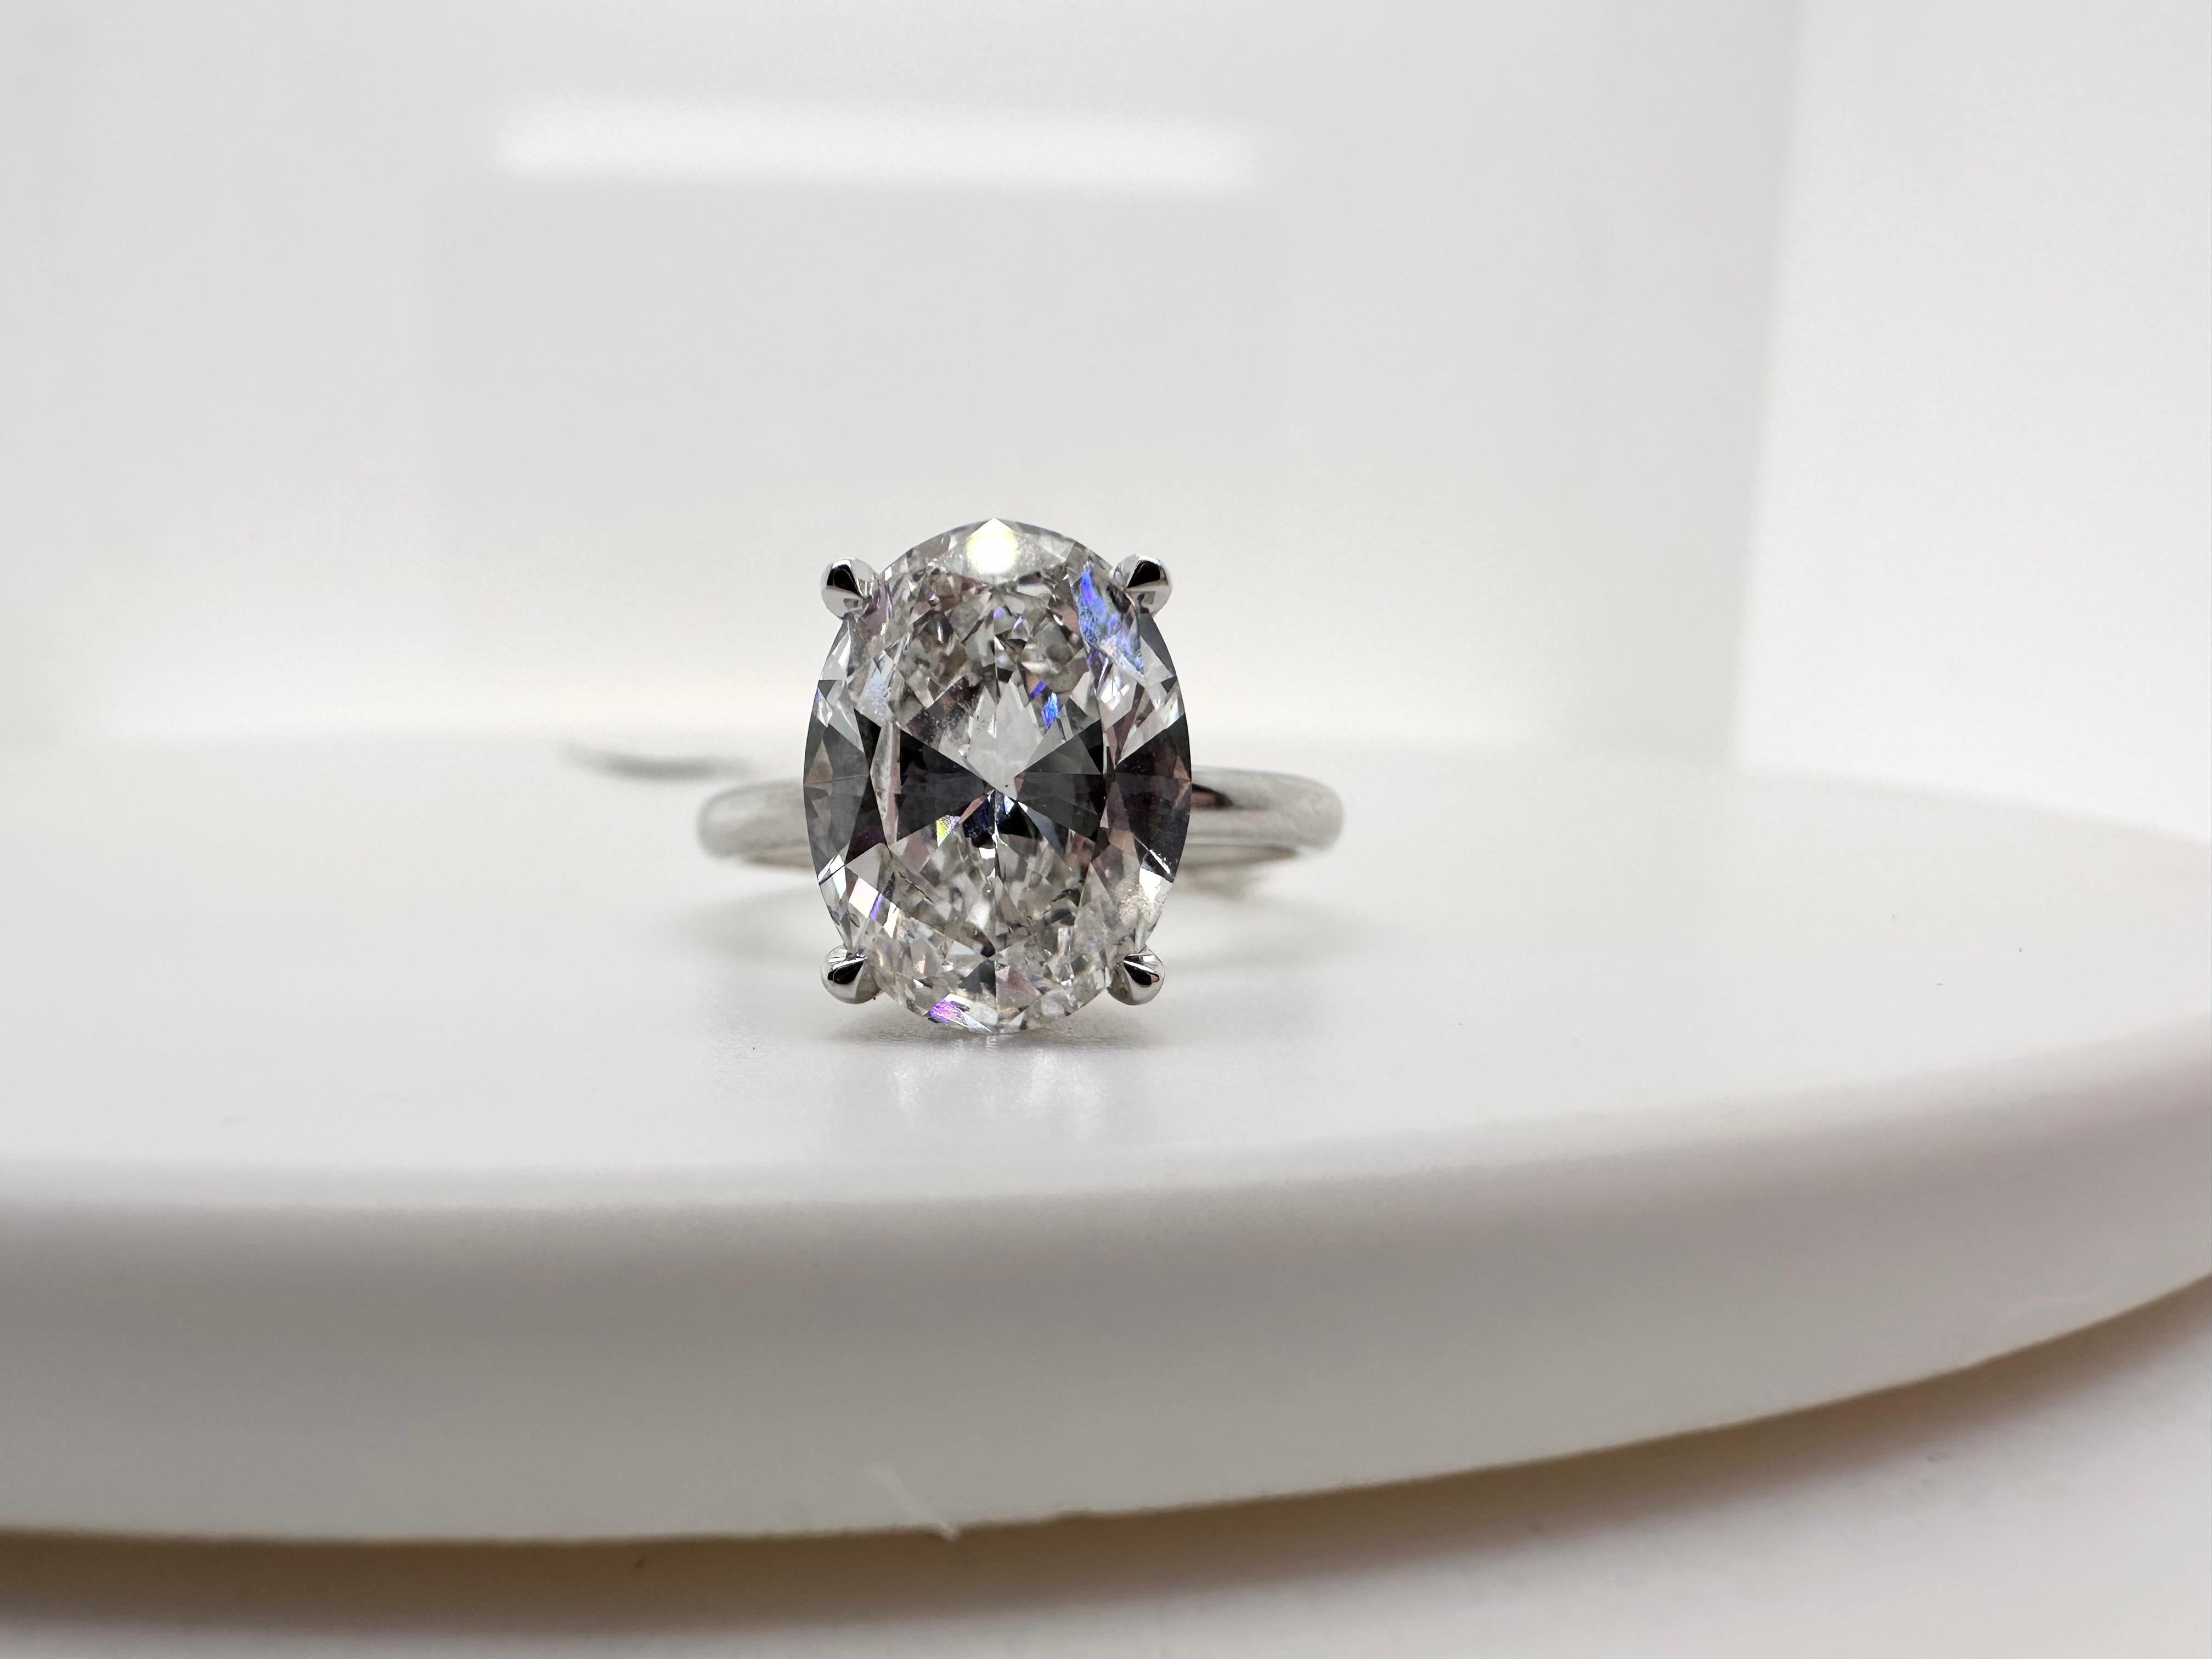 Huge oval engagement ring in 18KT white gold, the center diamond is a stunning 3.03 carats SI2 clarity and G color diamond certified by GIA. This ring is a showstopper with its brilliance yet humble classical design!

Metal Type: 18KT
Size:6
Natural